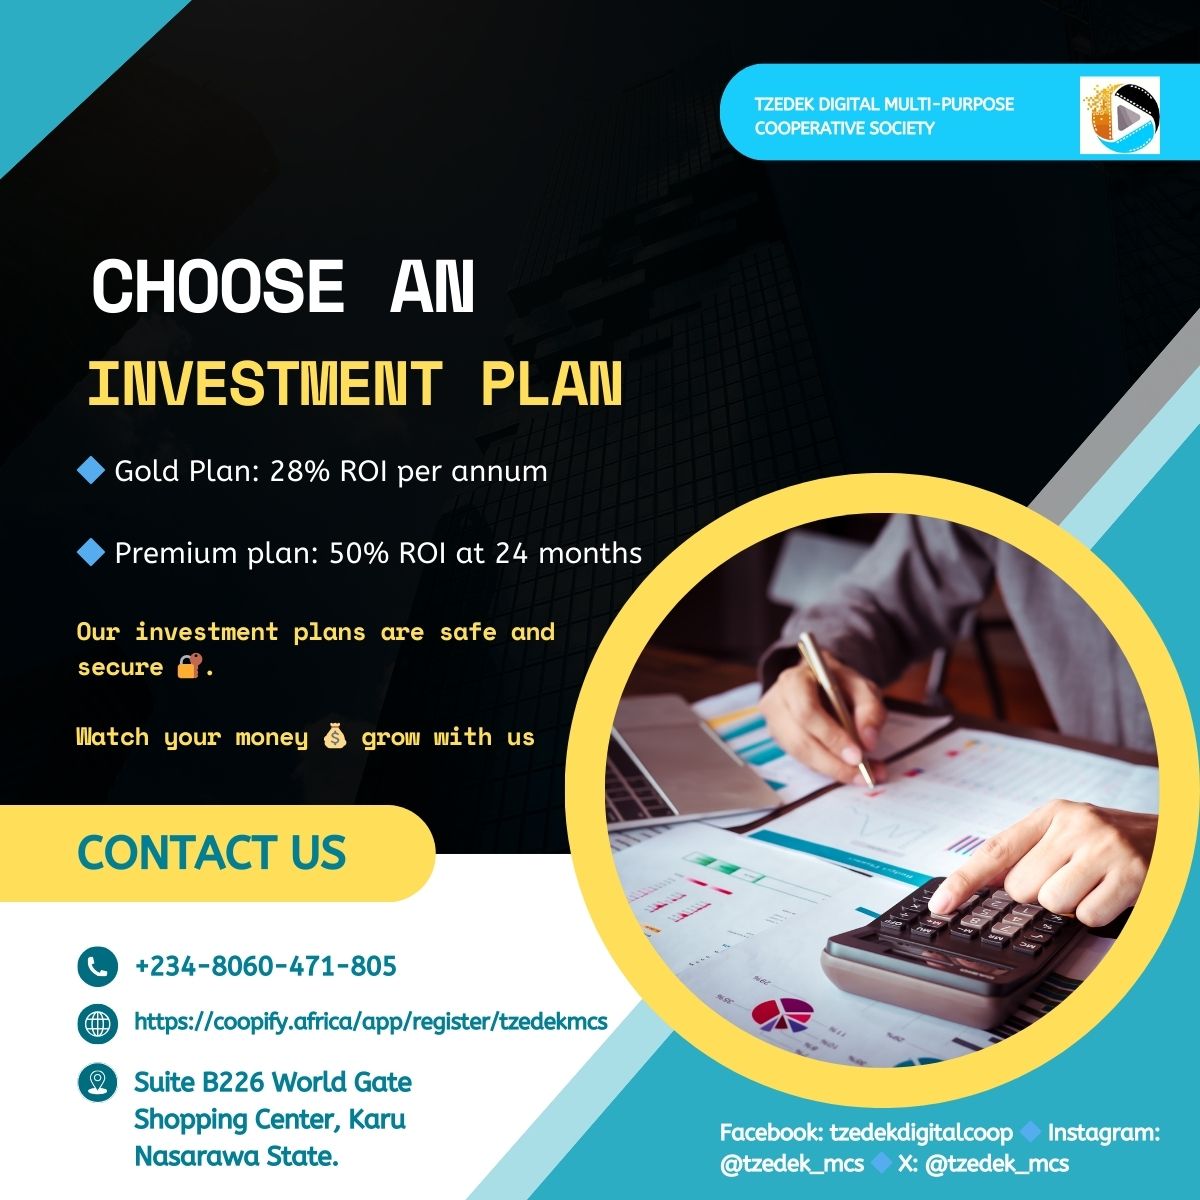 Choose a plan today!

We have you covered.

#digitalcooperative #cooperativeworld #FinancialServices #ConnectingAll #consultancy